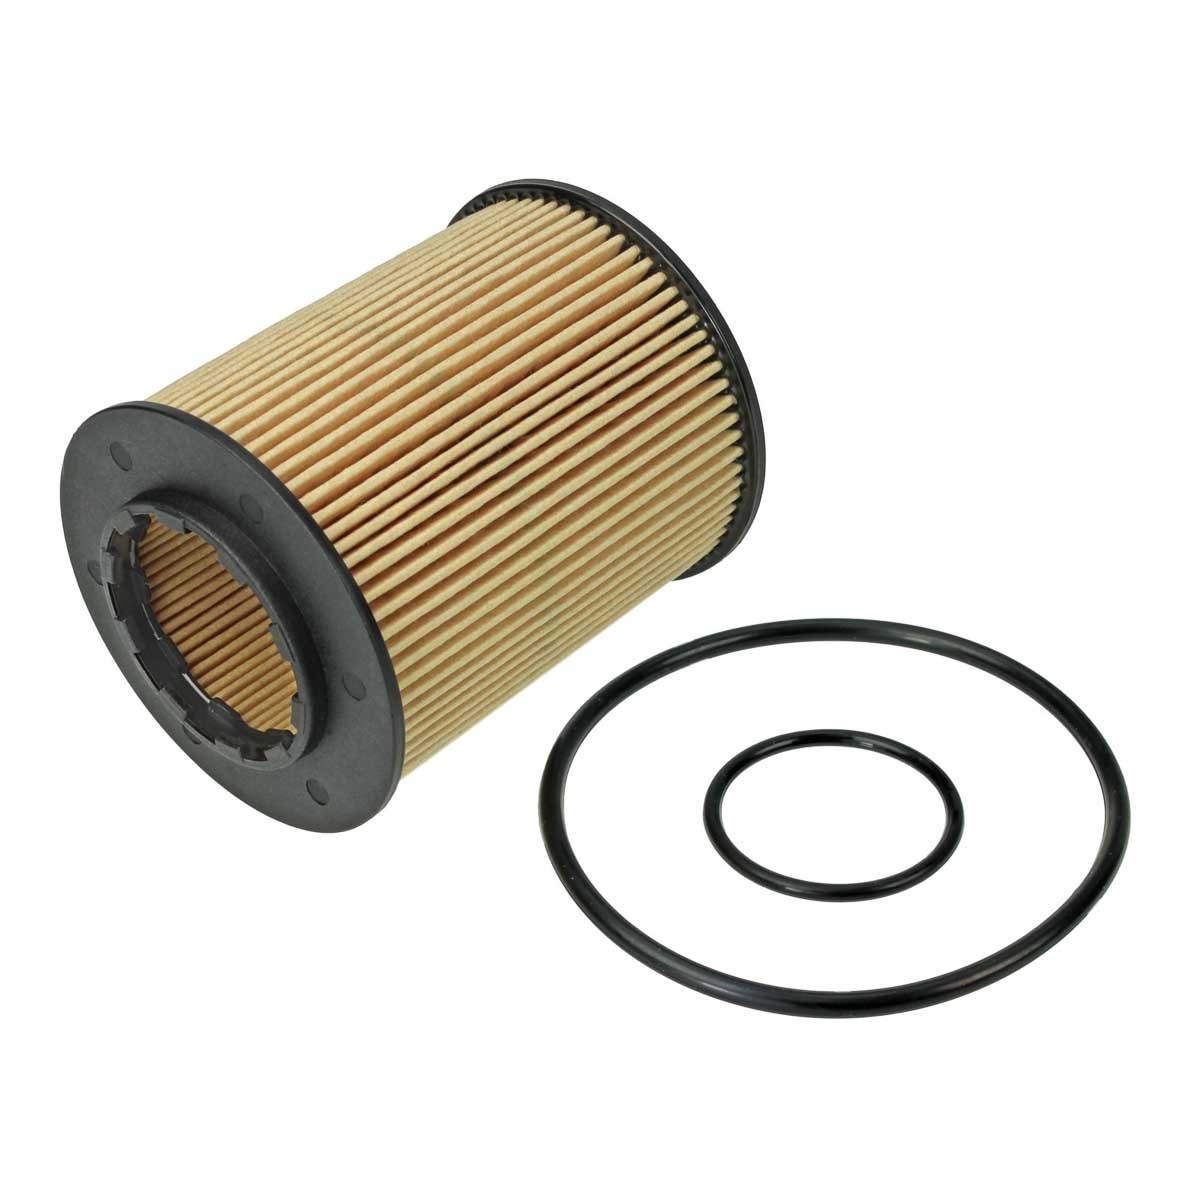 Original MEYLE MOF0180 Oil filters 614 322 0003 for OPEL ASTRA